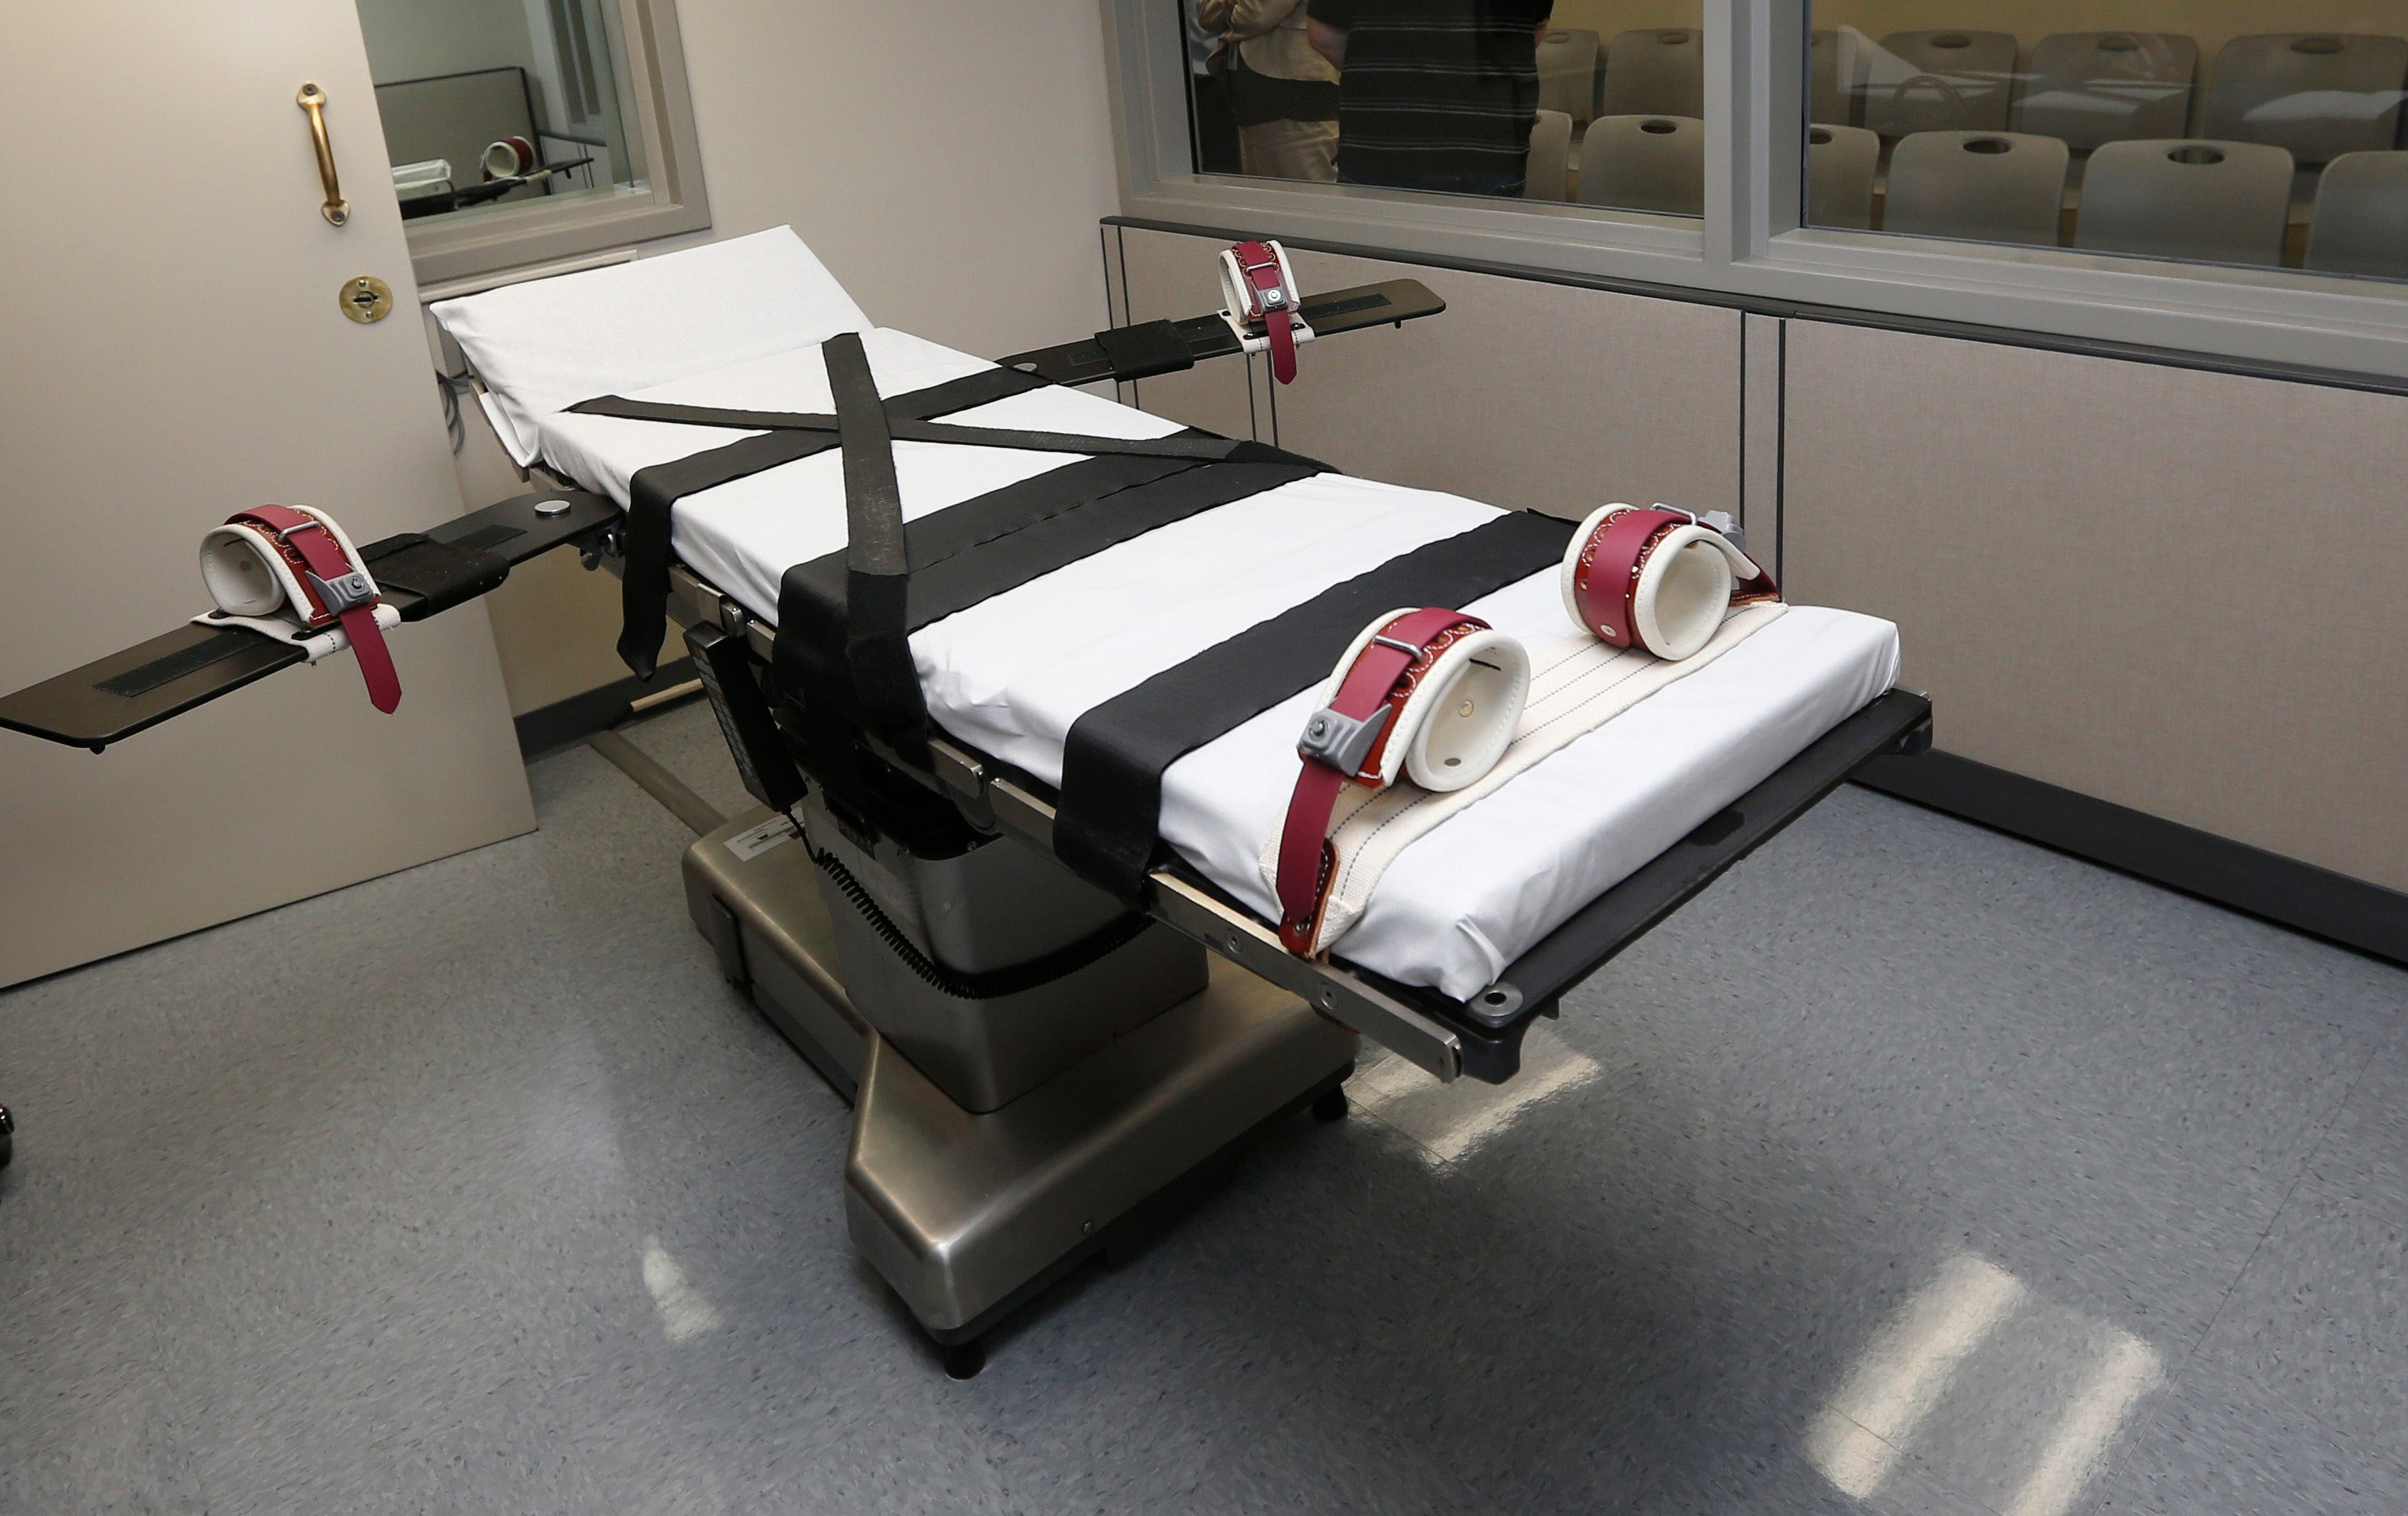 Oklahoma executions to resume after botching lethal injection in 2015